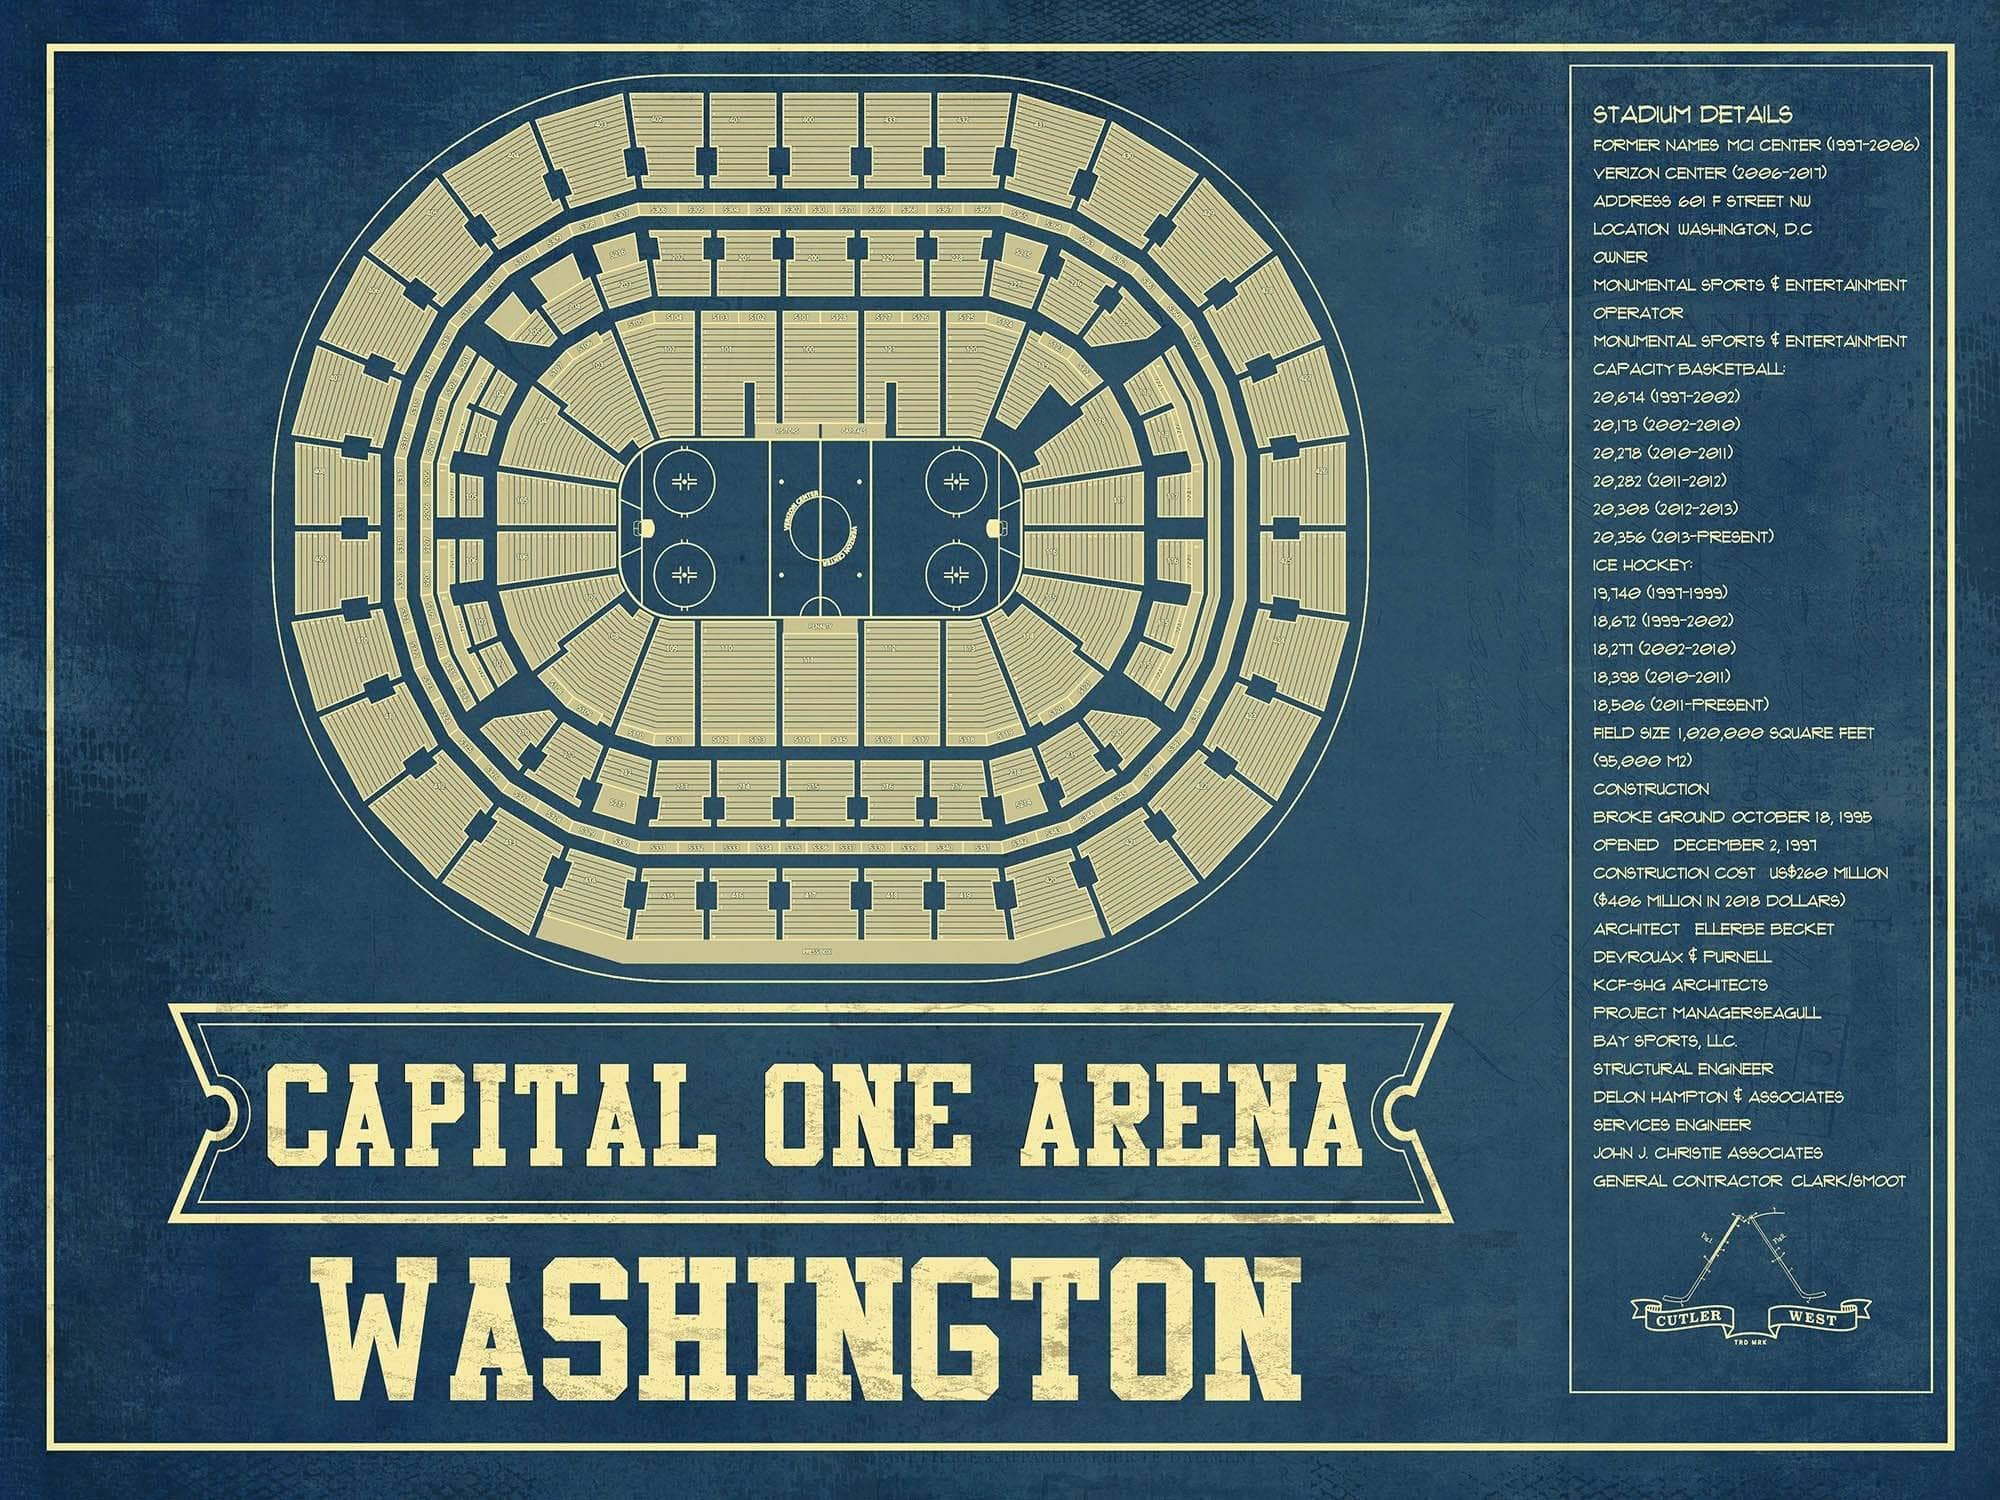 Cutler West 14" x 11" / Unframed Washington Capitals - Capital One Arena Seating Chart Vintage Art Print 673825643-14"-x-11"81710